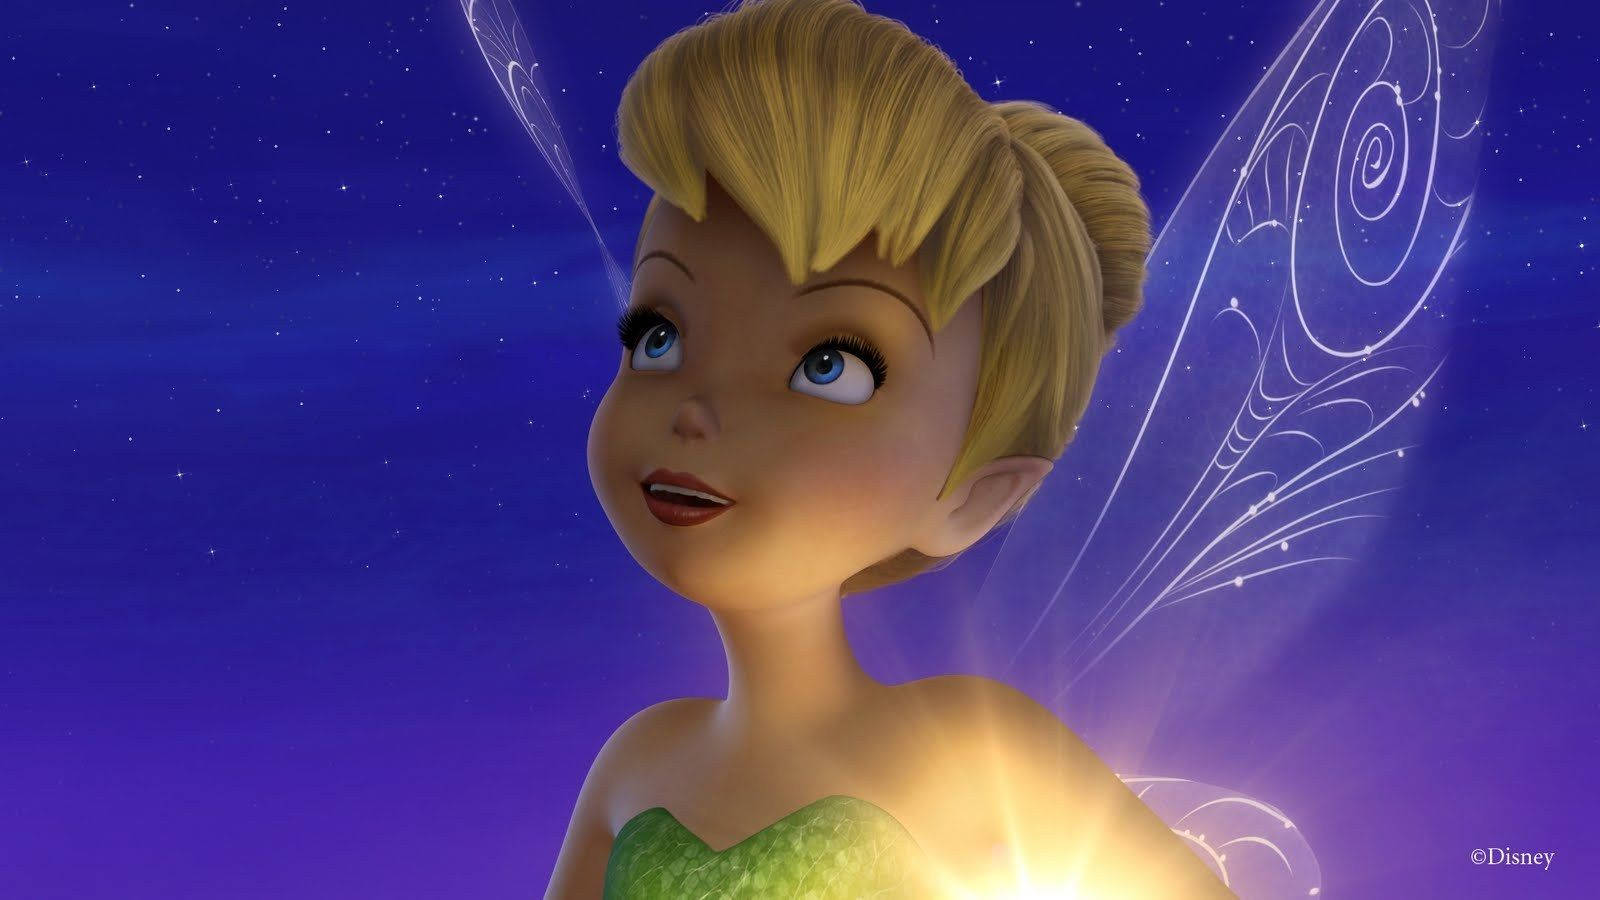 Free Tinkerbell Wallpaper Downloads, [100+] Tinkerbell Wallpapers for FREE  